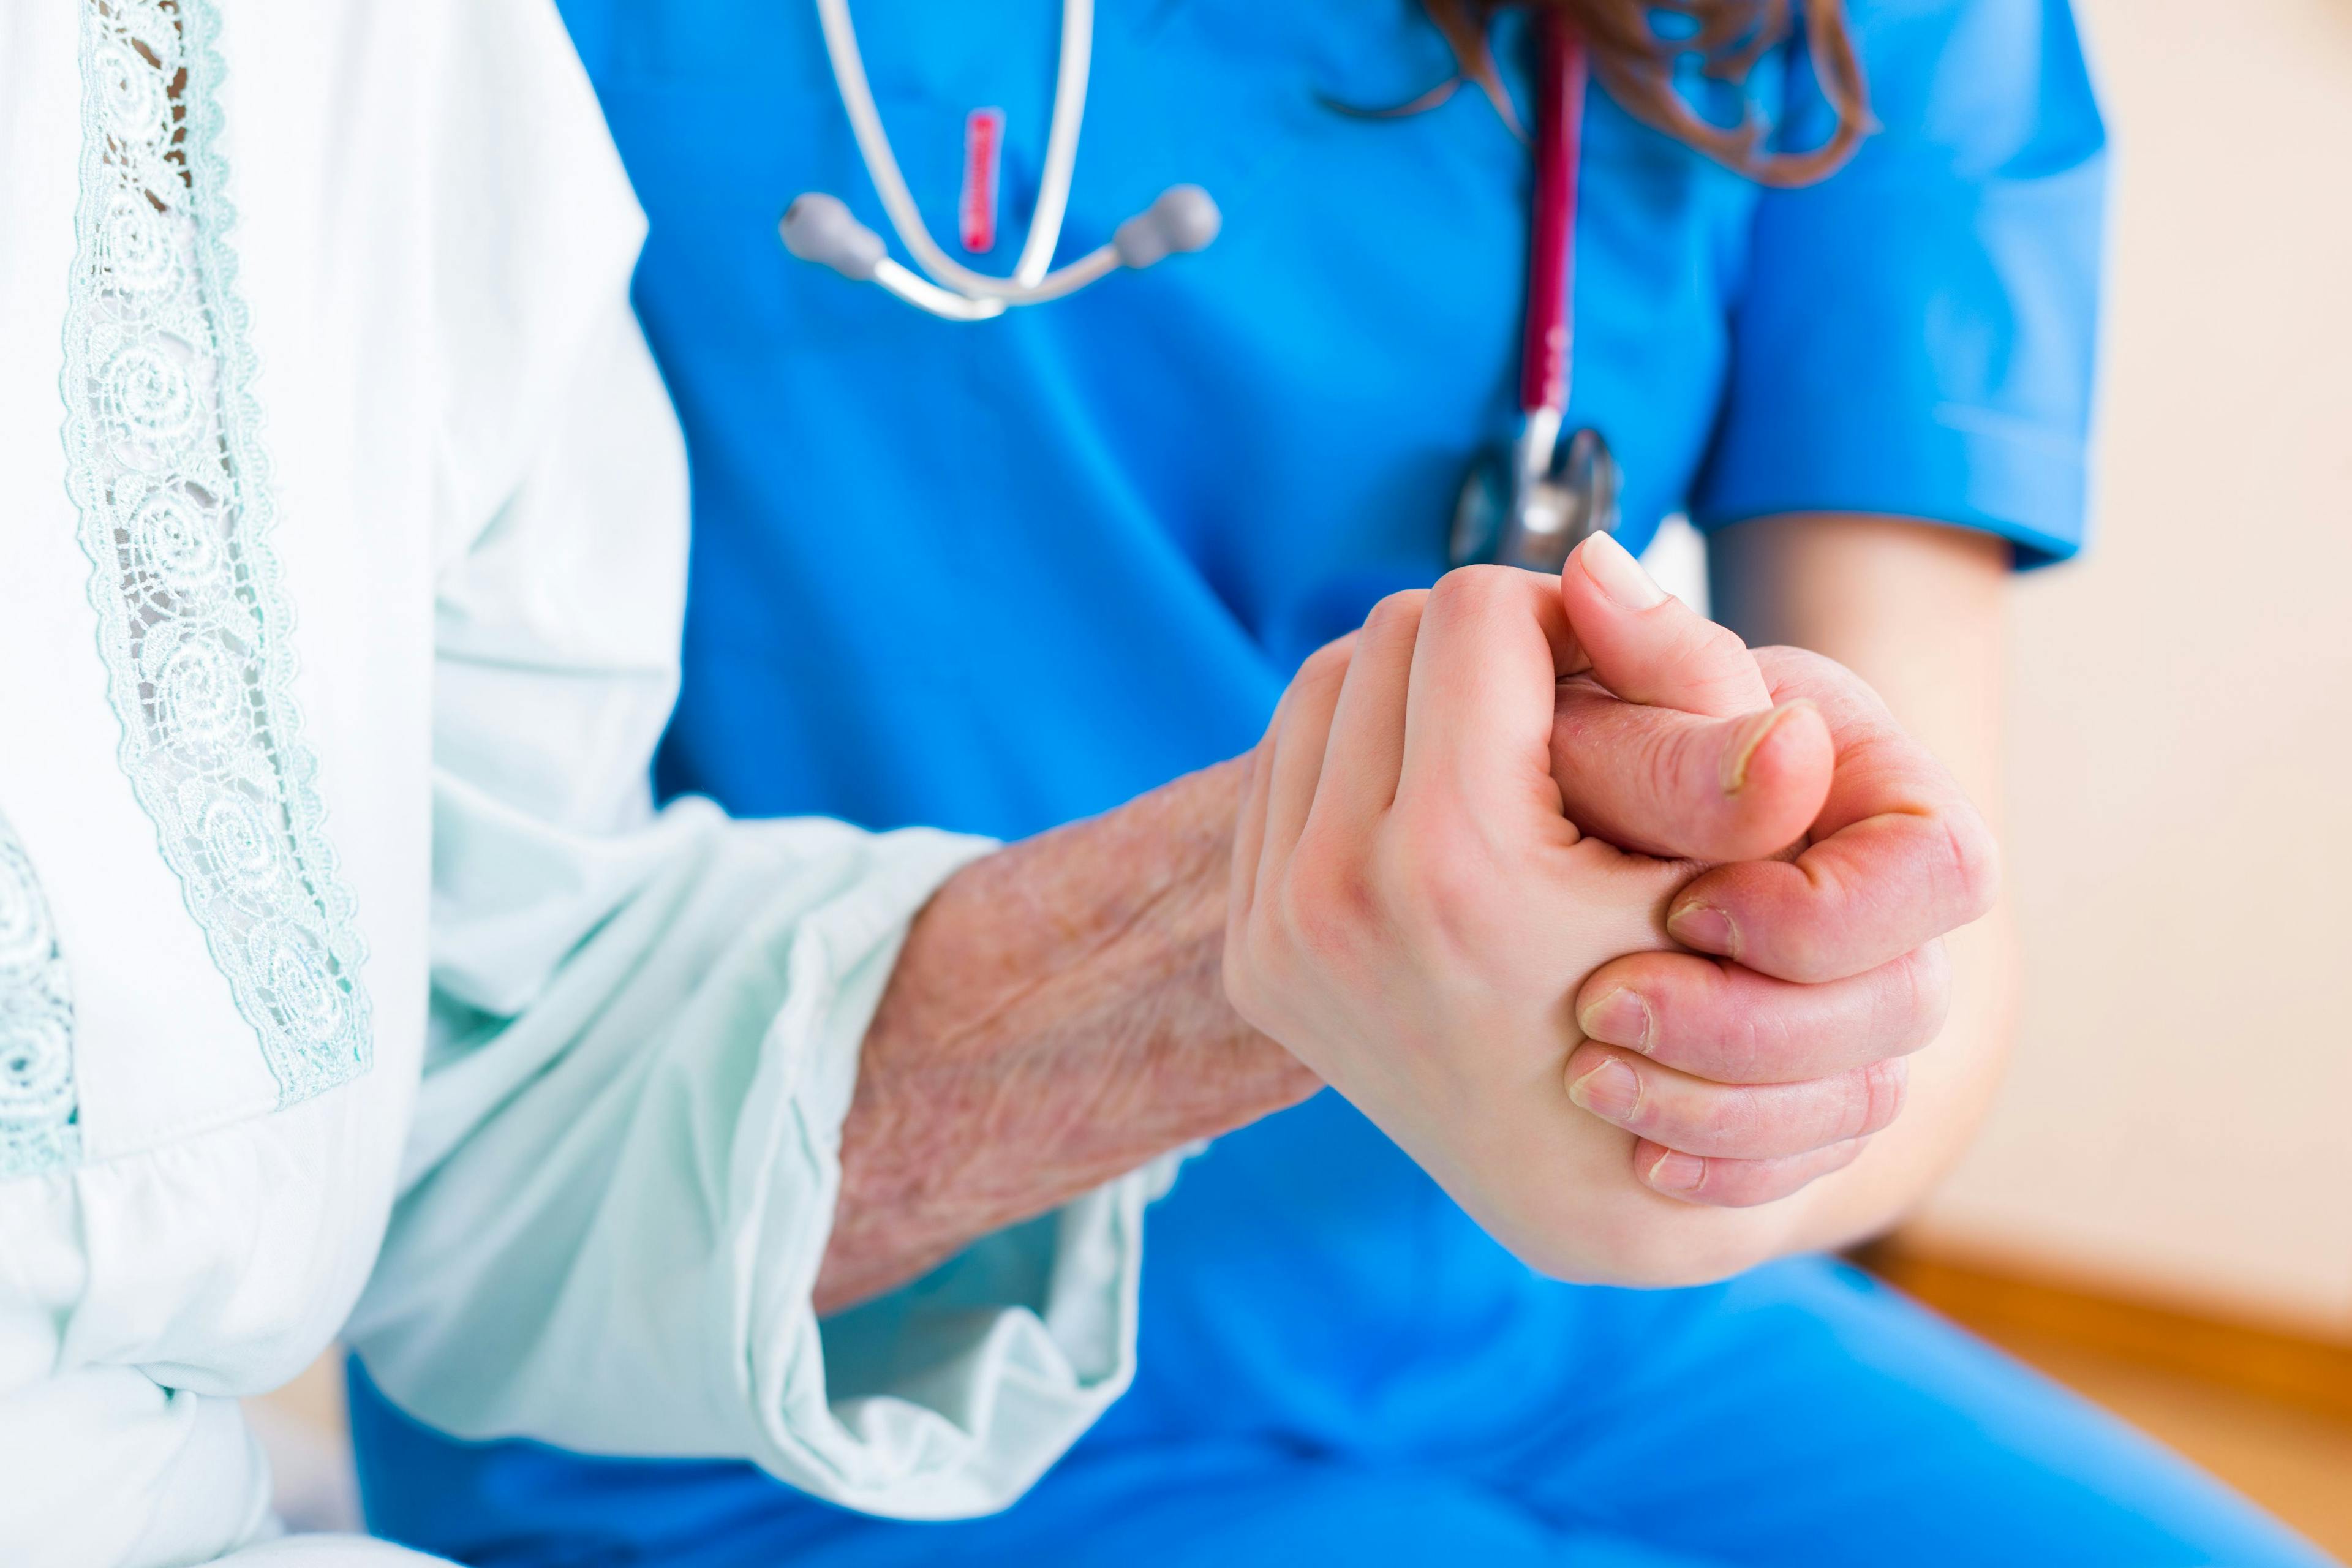 An older patient holding hands with a doctor.